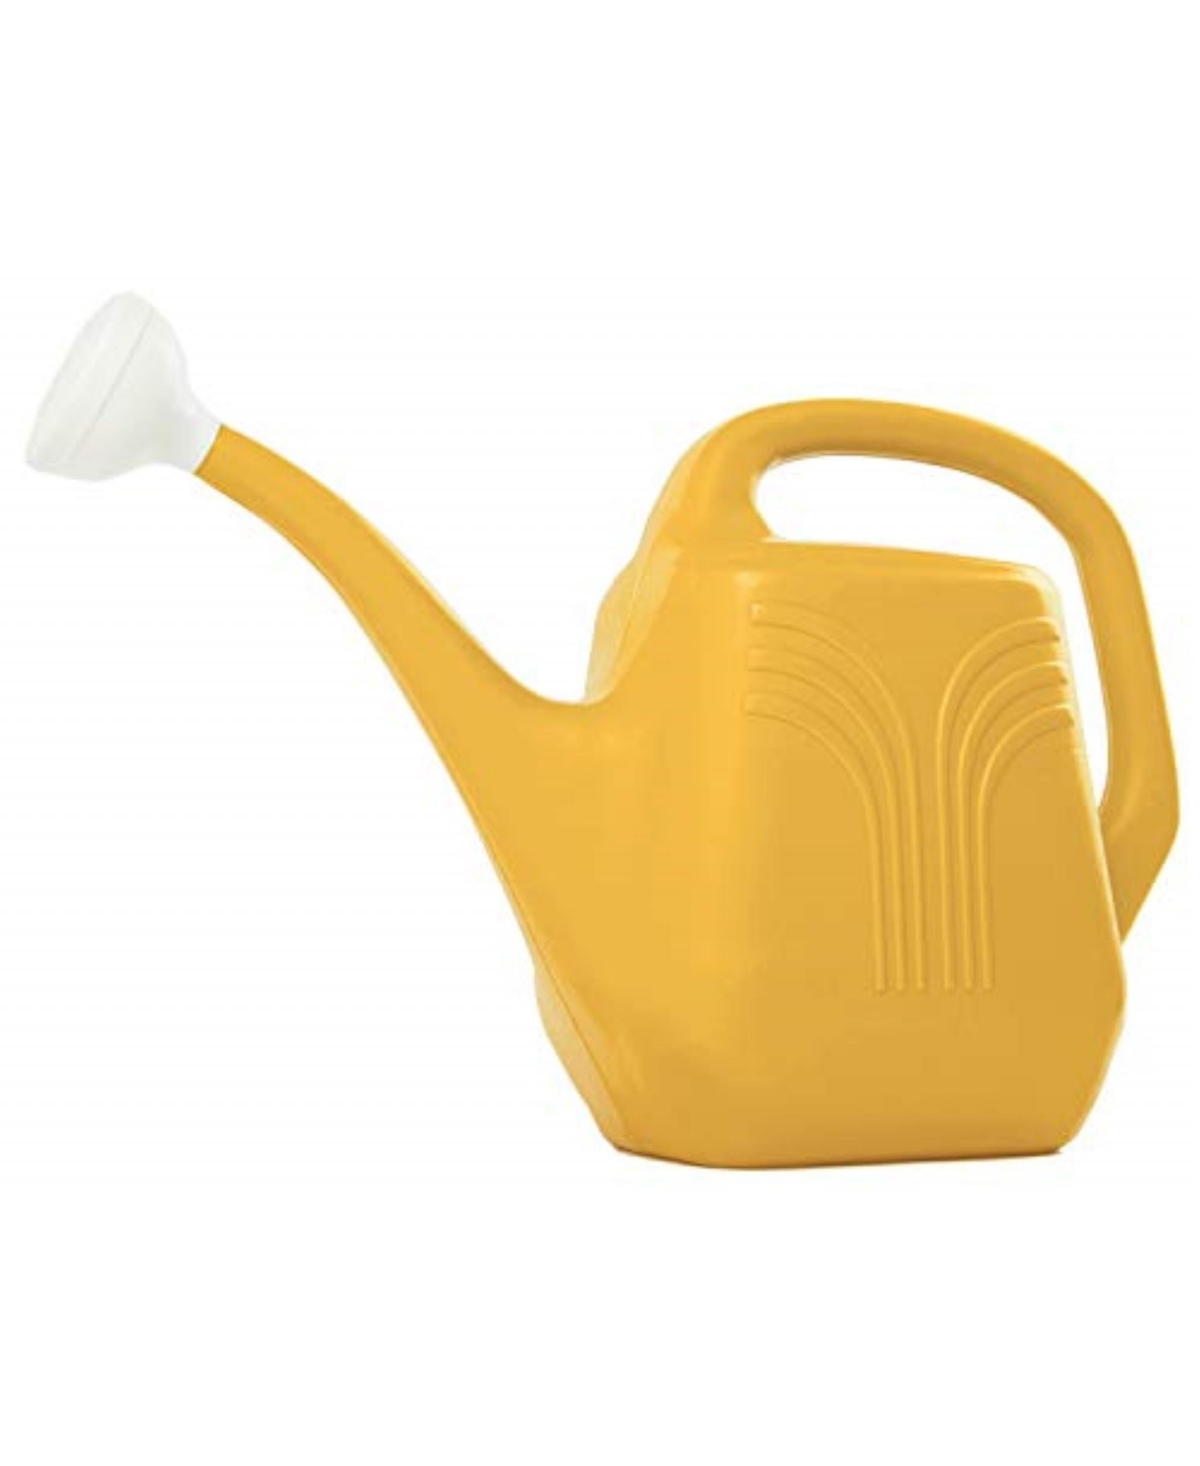 Deluxe Plastic Watering Can, Earthy Yellow, 2.5 Gallons - Yellow